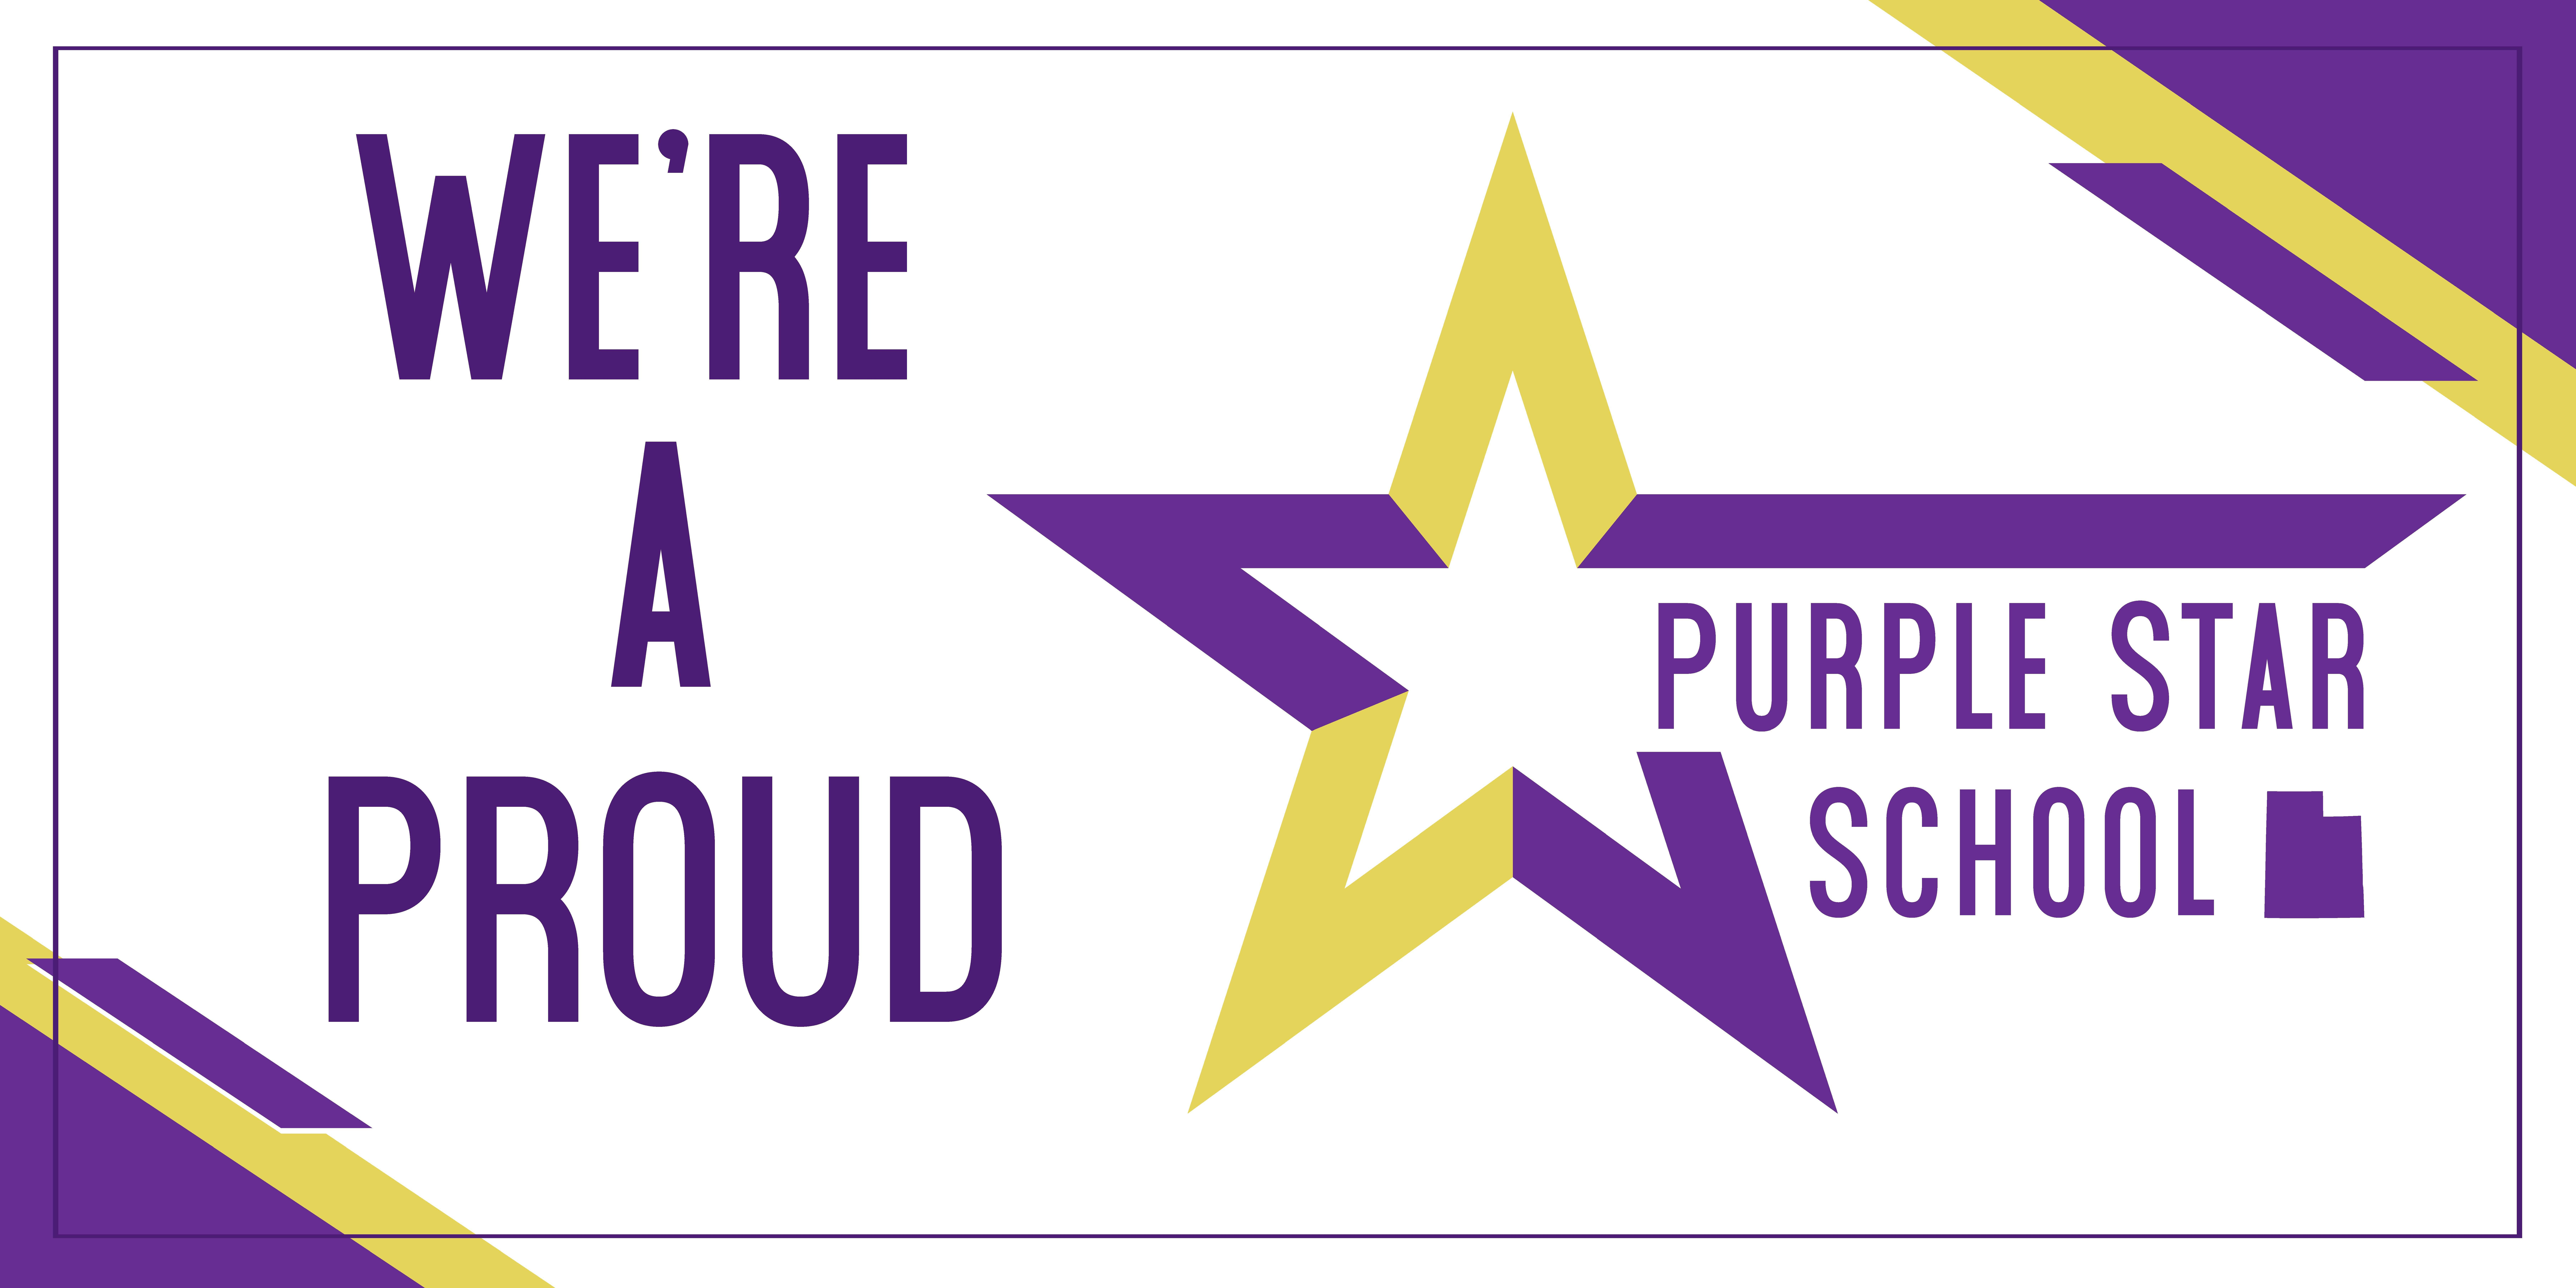 Image says "We are a proud purple star school" In pruple writing with a yelloe and purple star on a white background